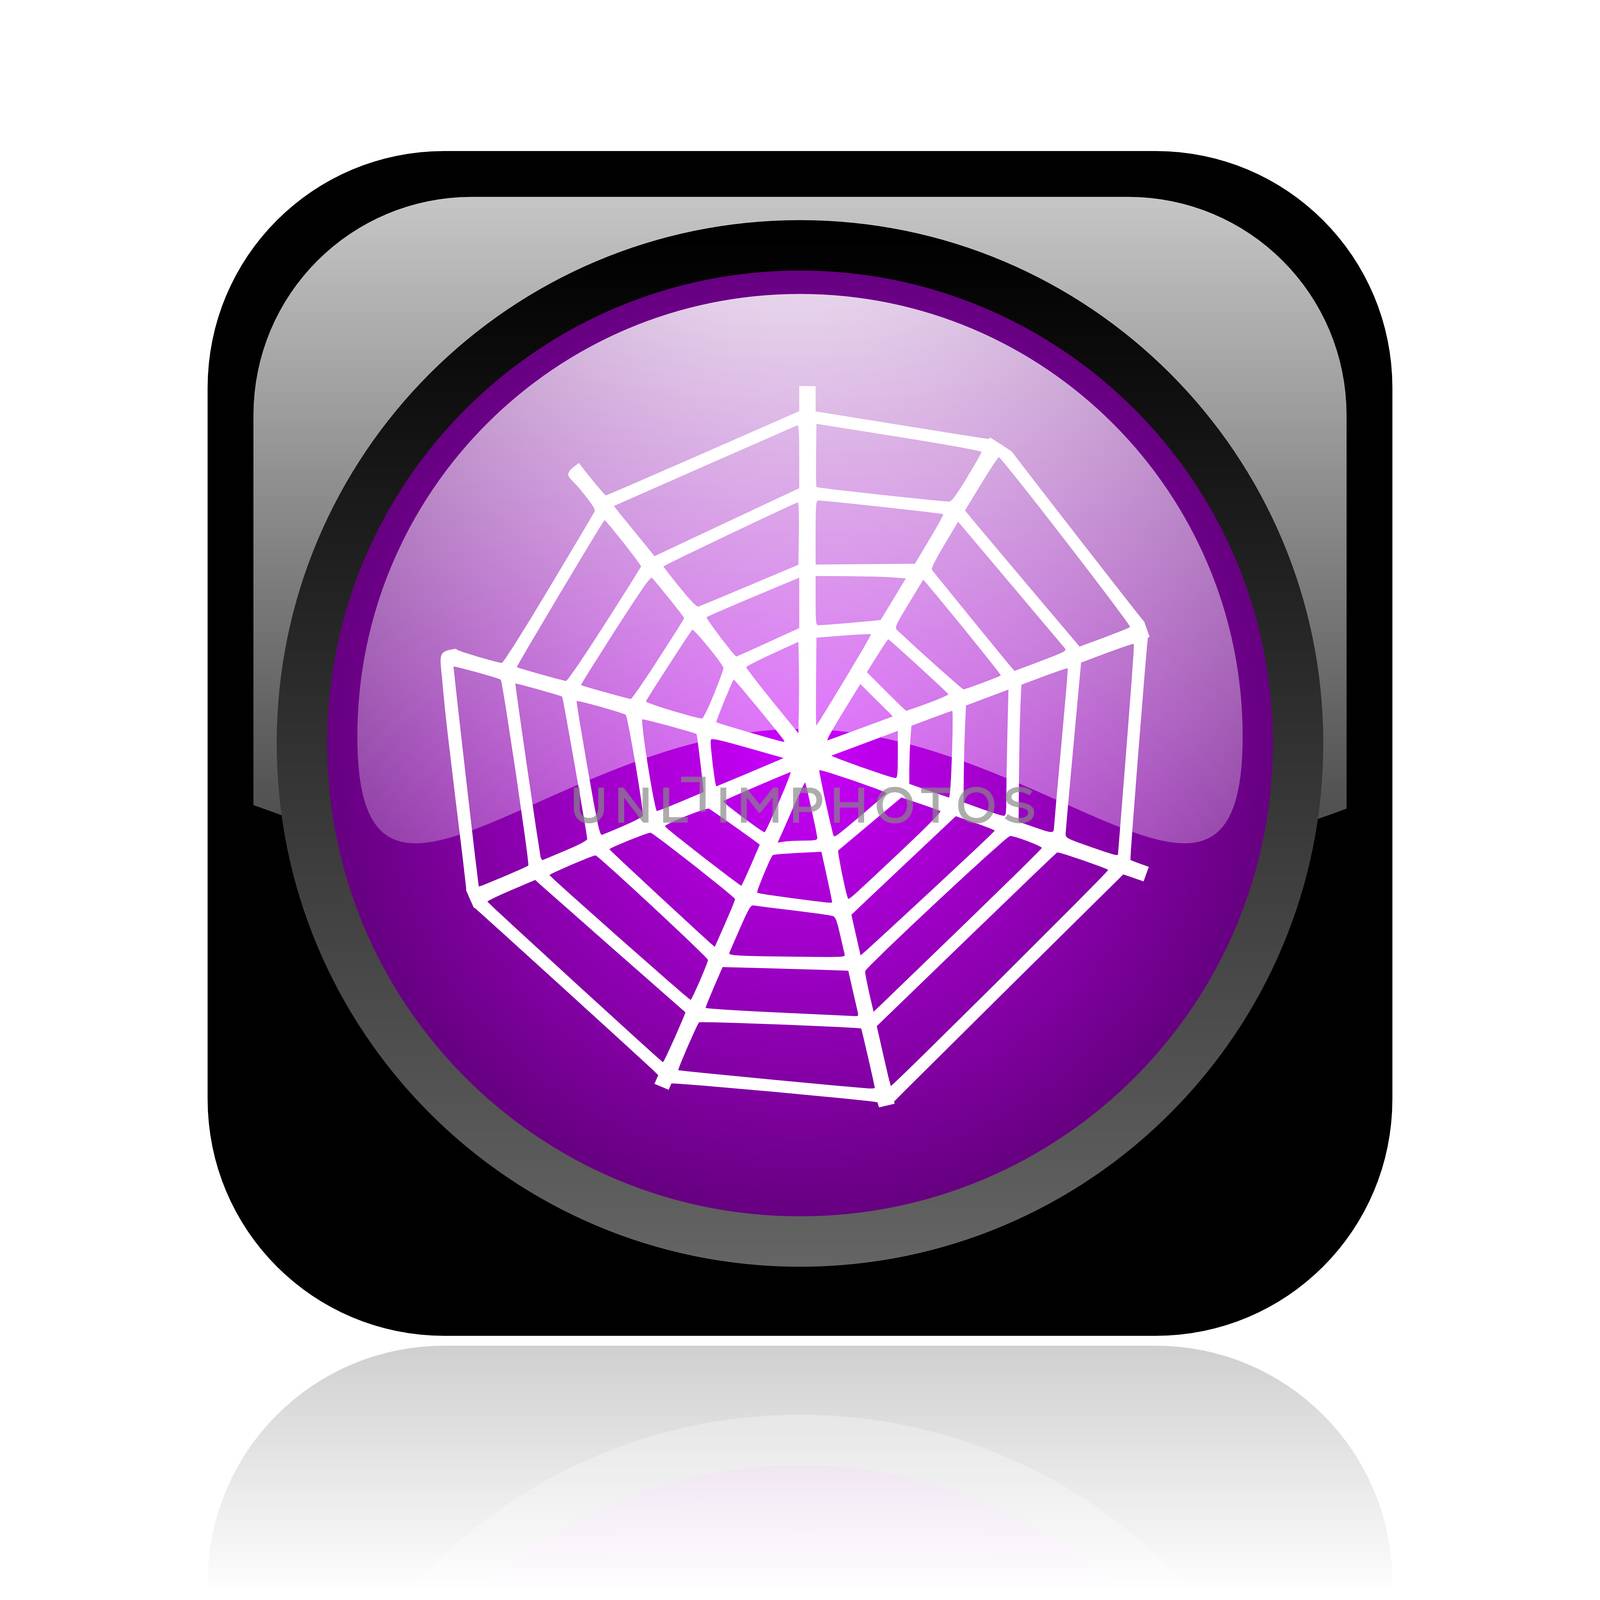 spider web black and violet square web glossy icon